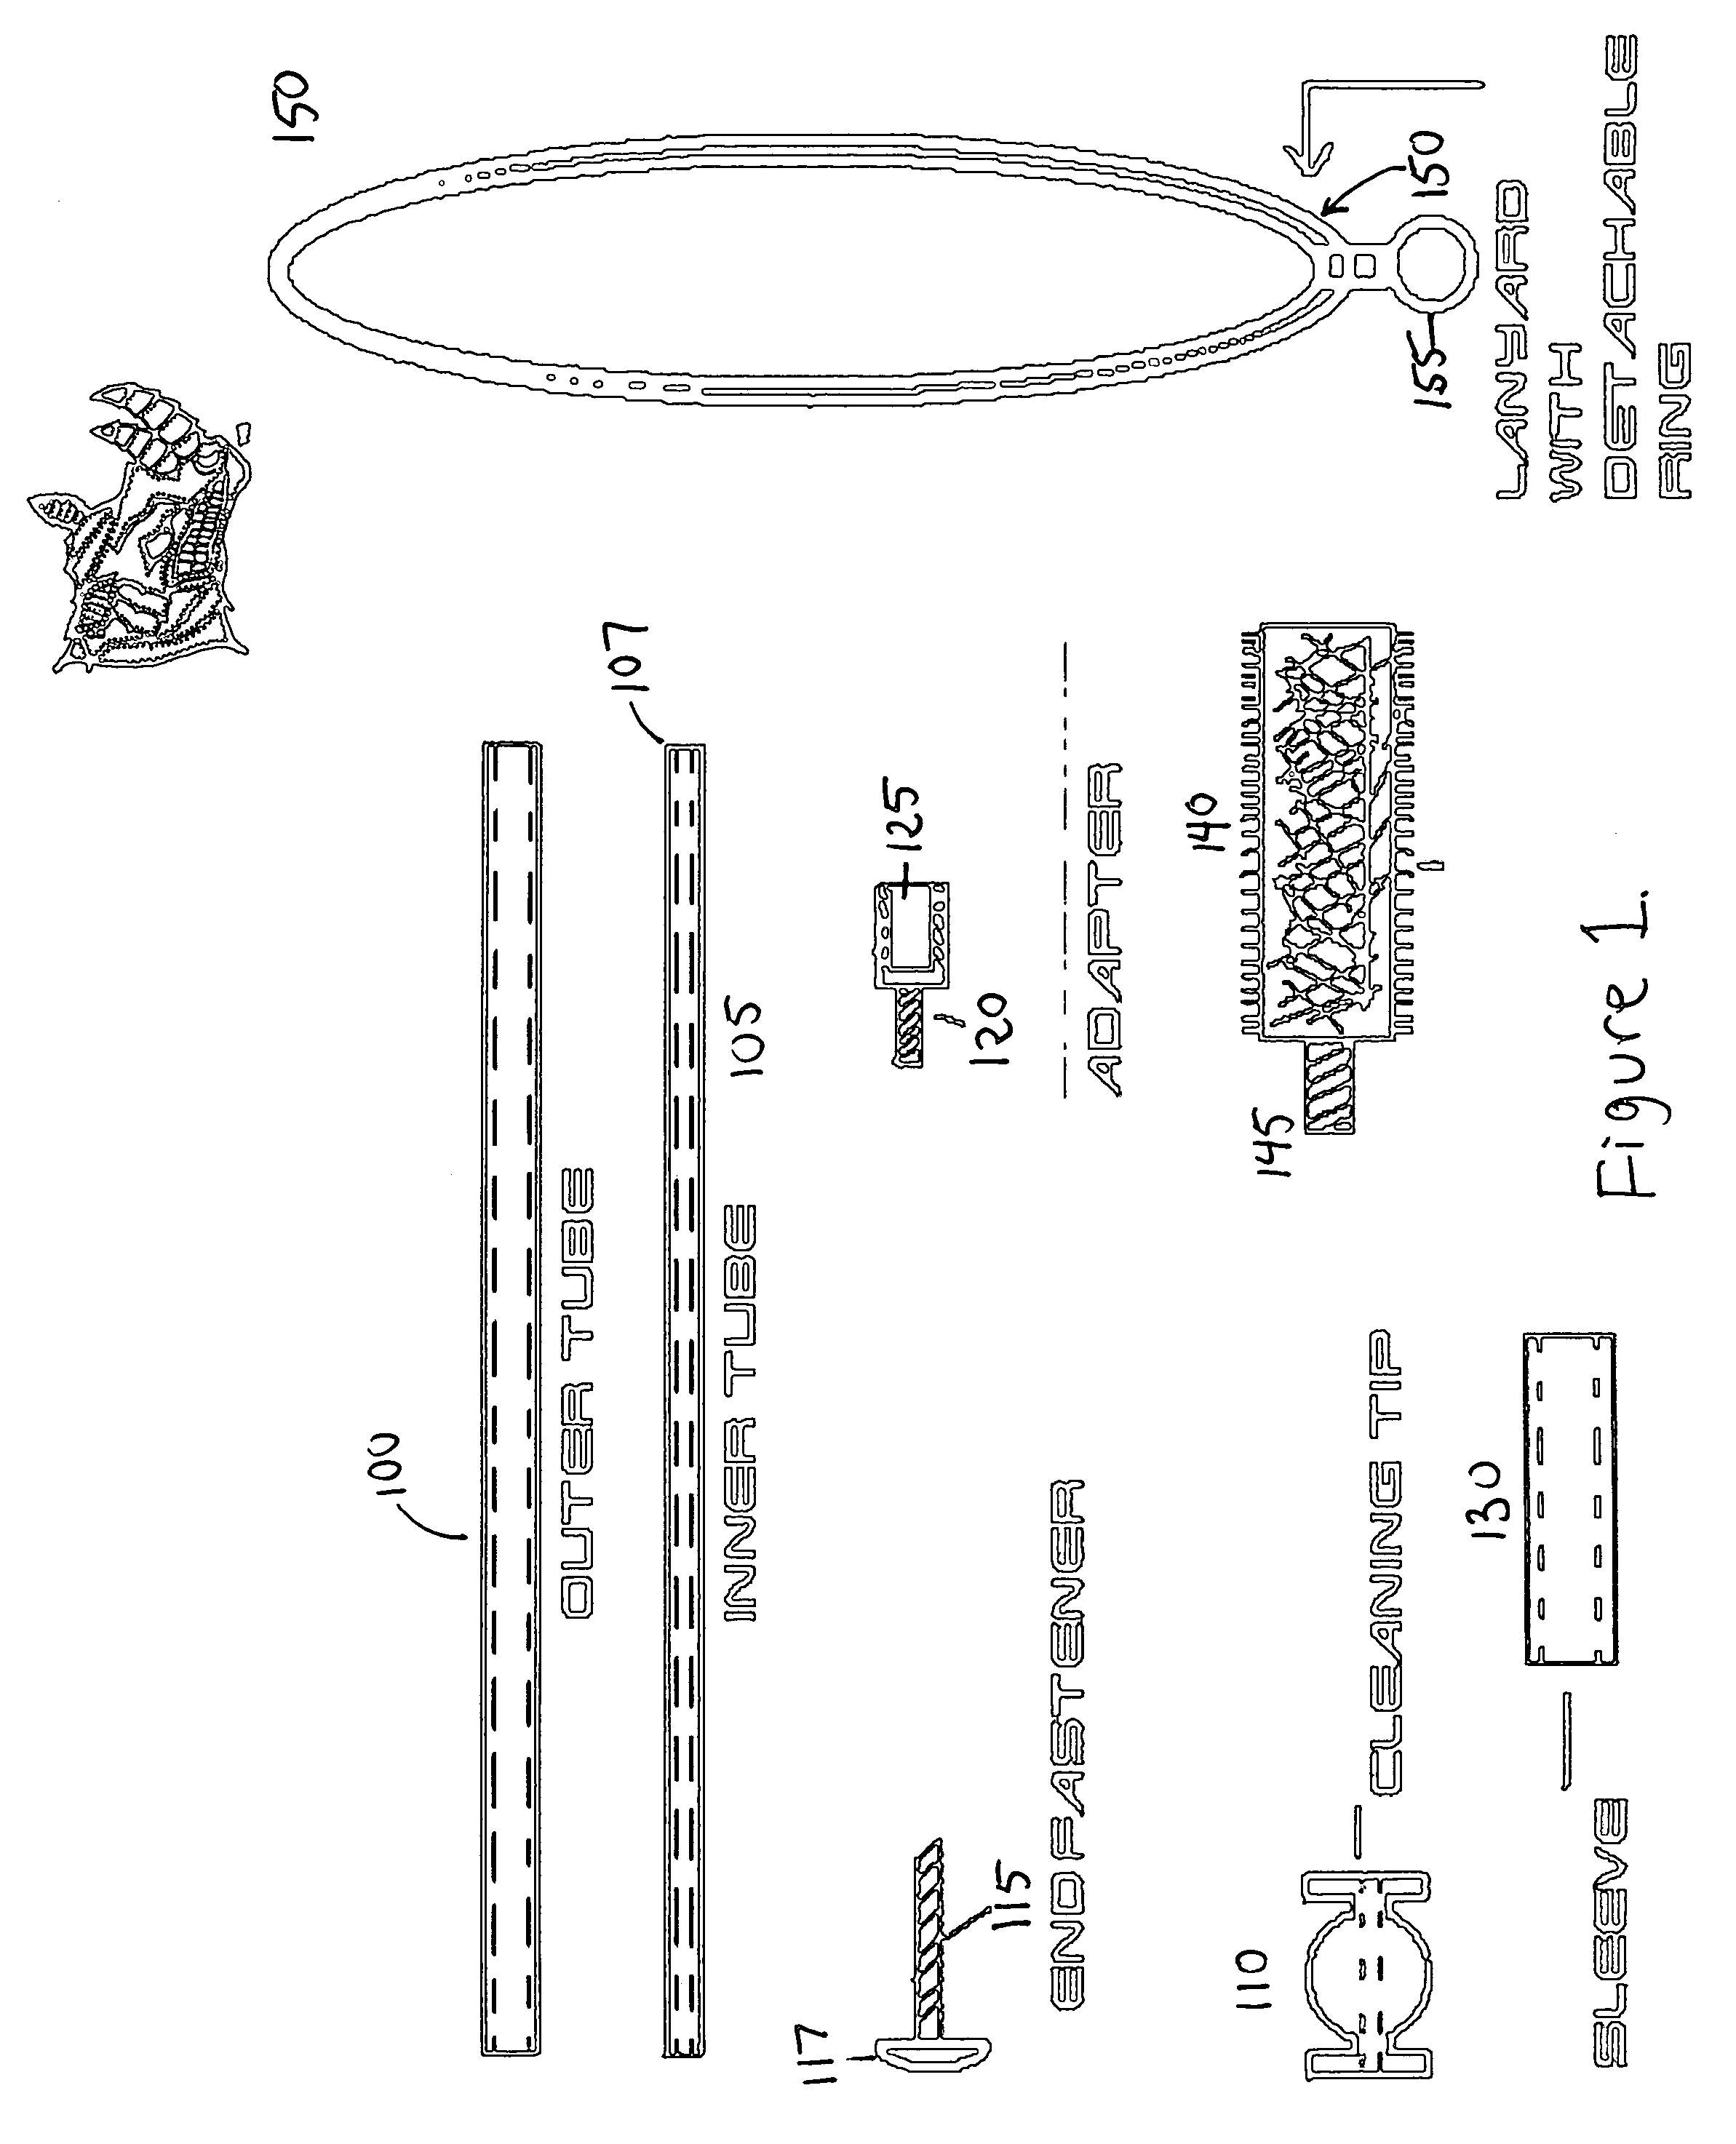 Apparatus and method for cleaning paintball guns